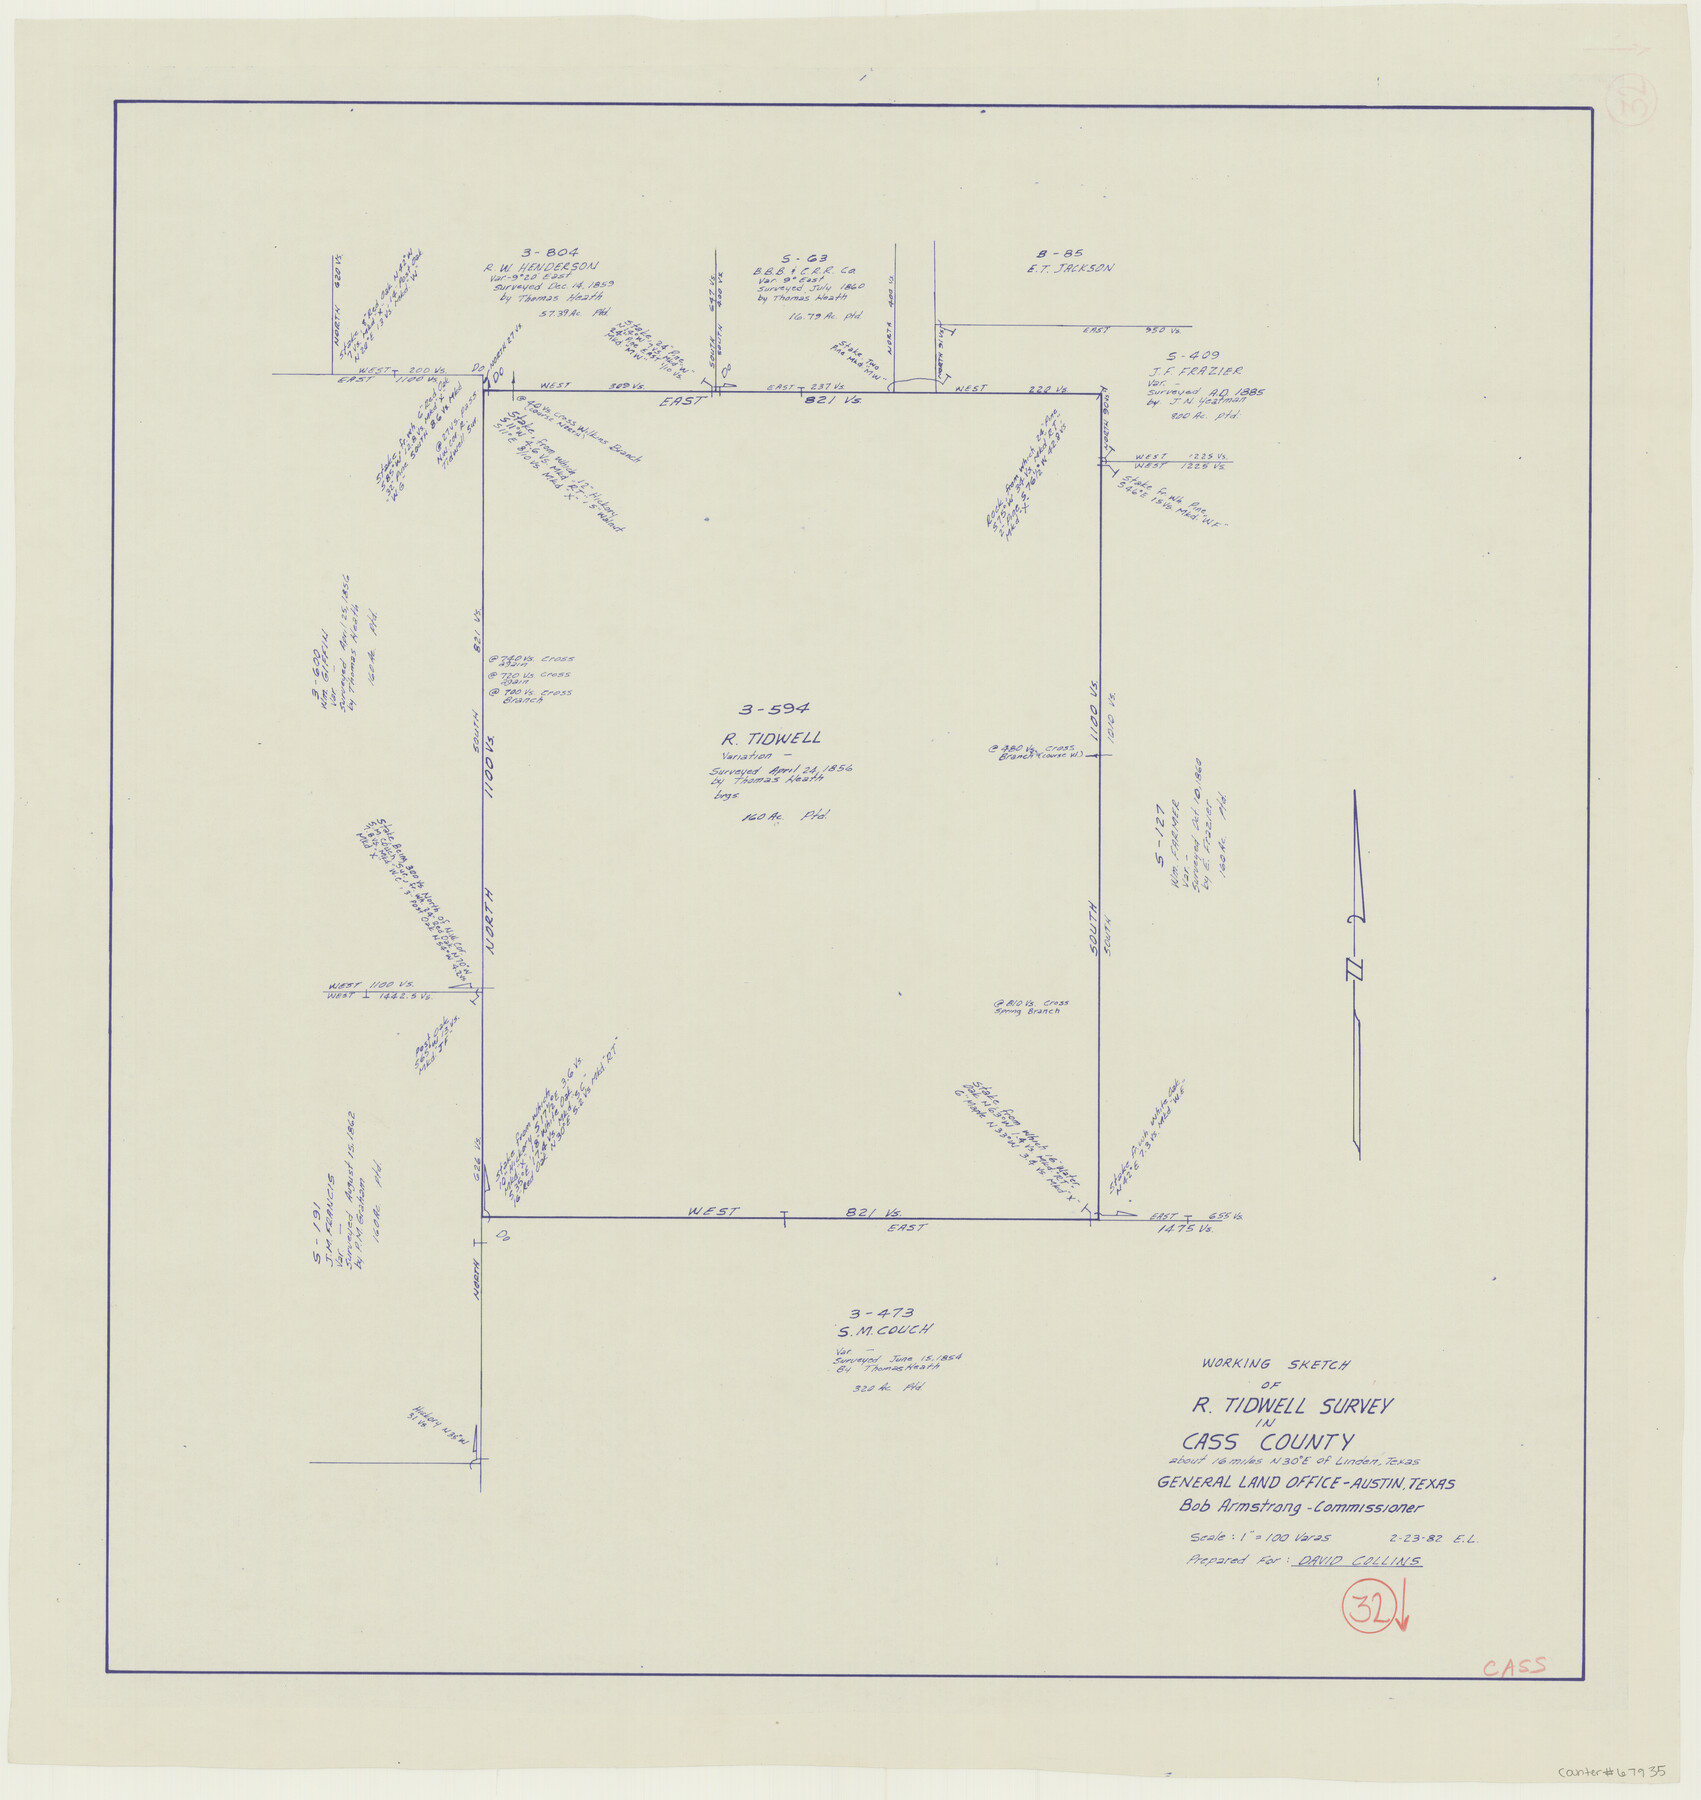 67935, Cass County Working Sketch 32, General Map Collection